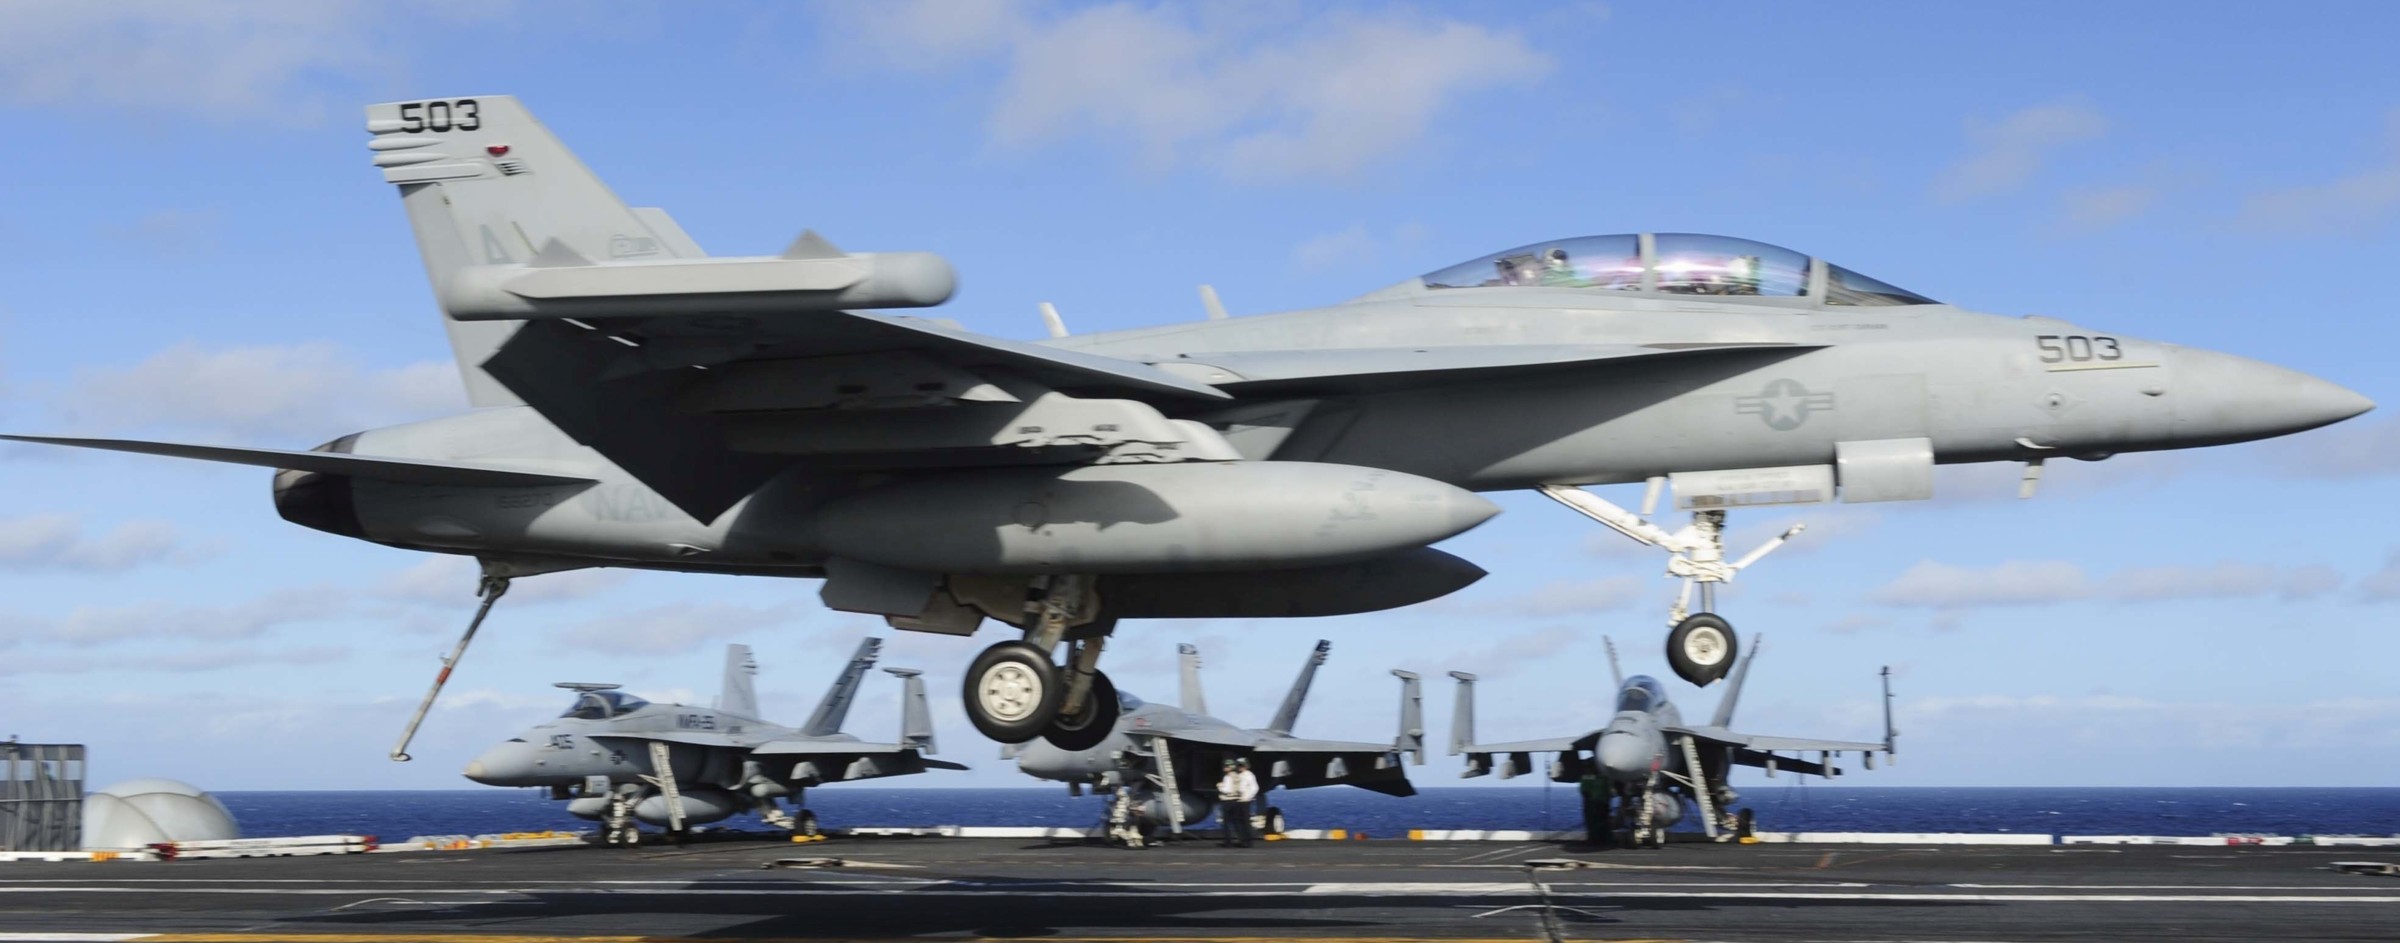 vaq-137 rooks electronic attack squadron us navy ea-18g growler carrier air wing cvw-1 uss theodore roosevelt cvn-71 46